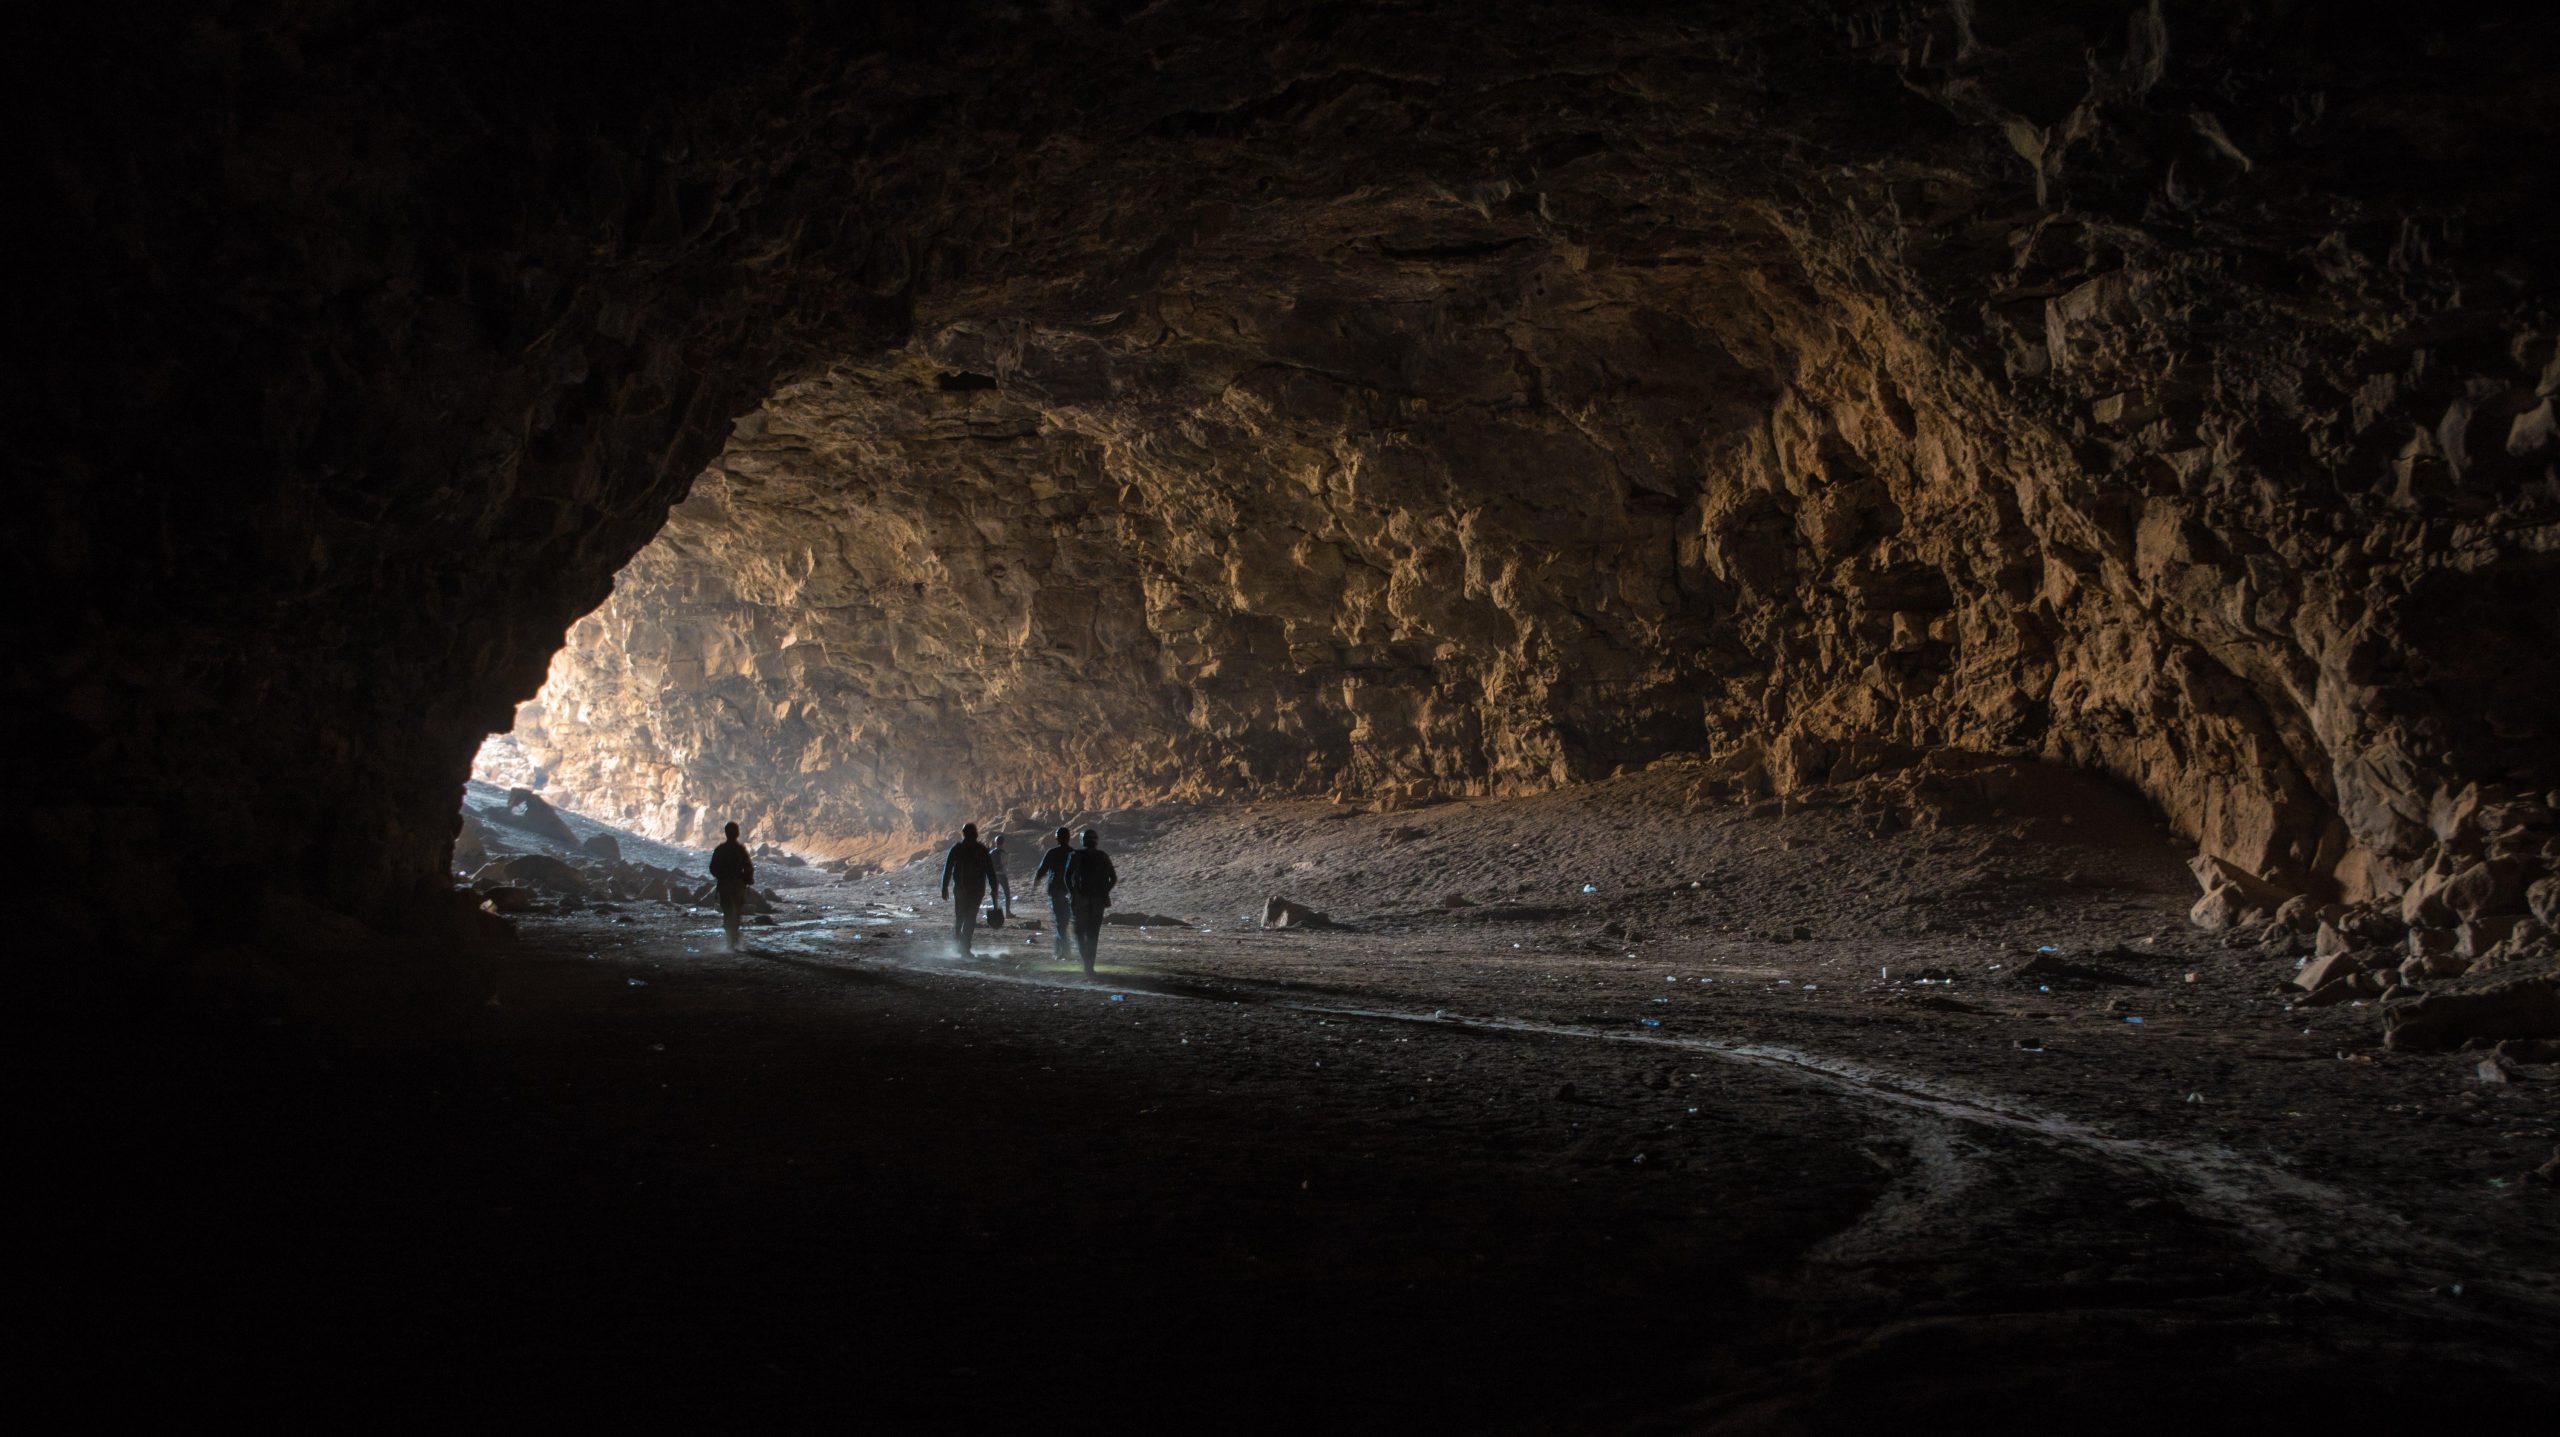 Humans Sheltered in This Lava Tube for Thousands of Years [Video]